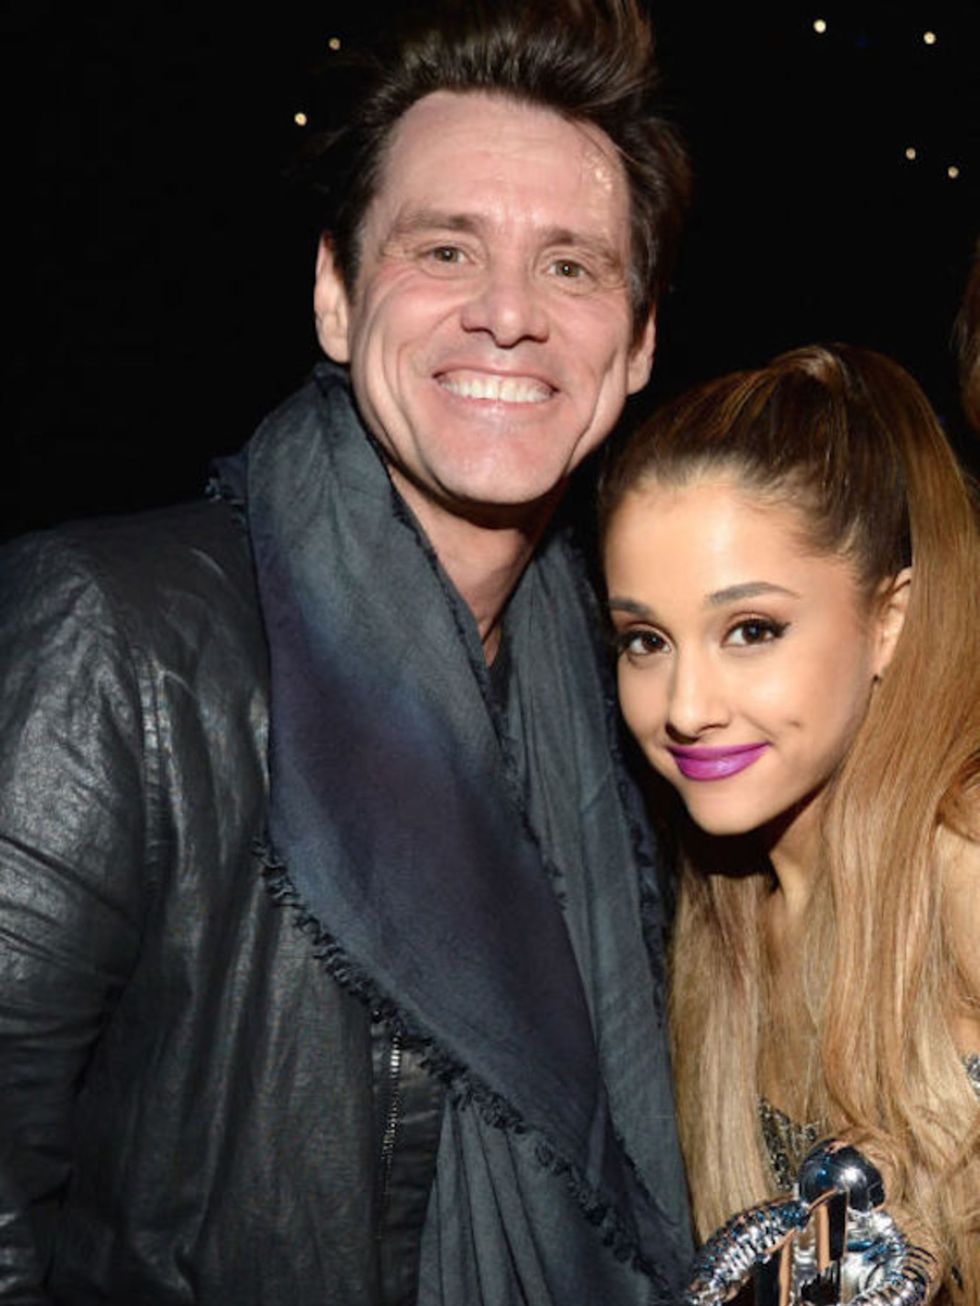 <p><strong>Ariana Grande</strong></p>

<p>It's hard to believe that Ariana Grande is the one fangirling over someone else, but it's 100% real. "My childhood crush, like, my lifelong crush, it kind of all goes togetherit's Jim Carrey," Grande said on Live